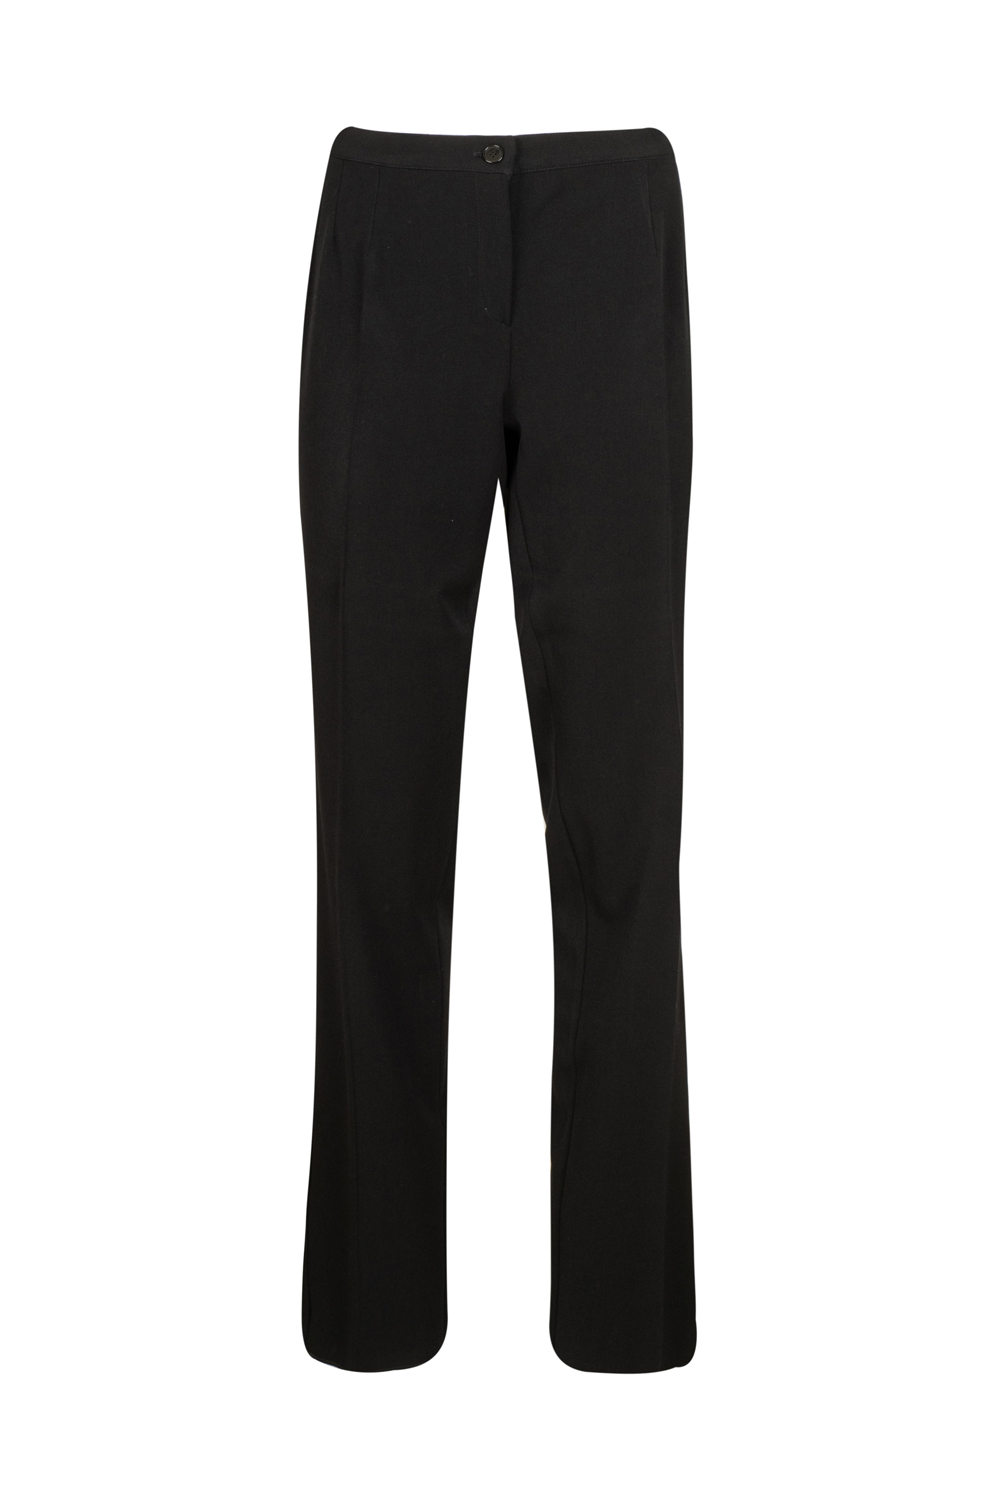 Straight Regular Long Trousers with Elasticated Back Band